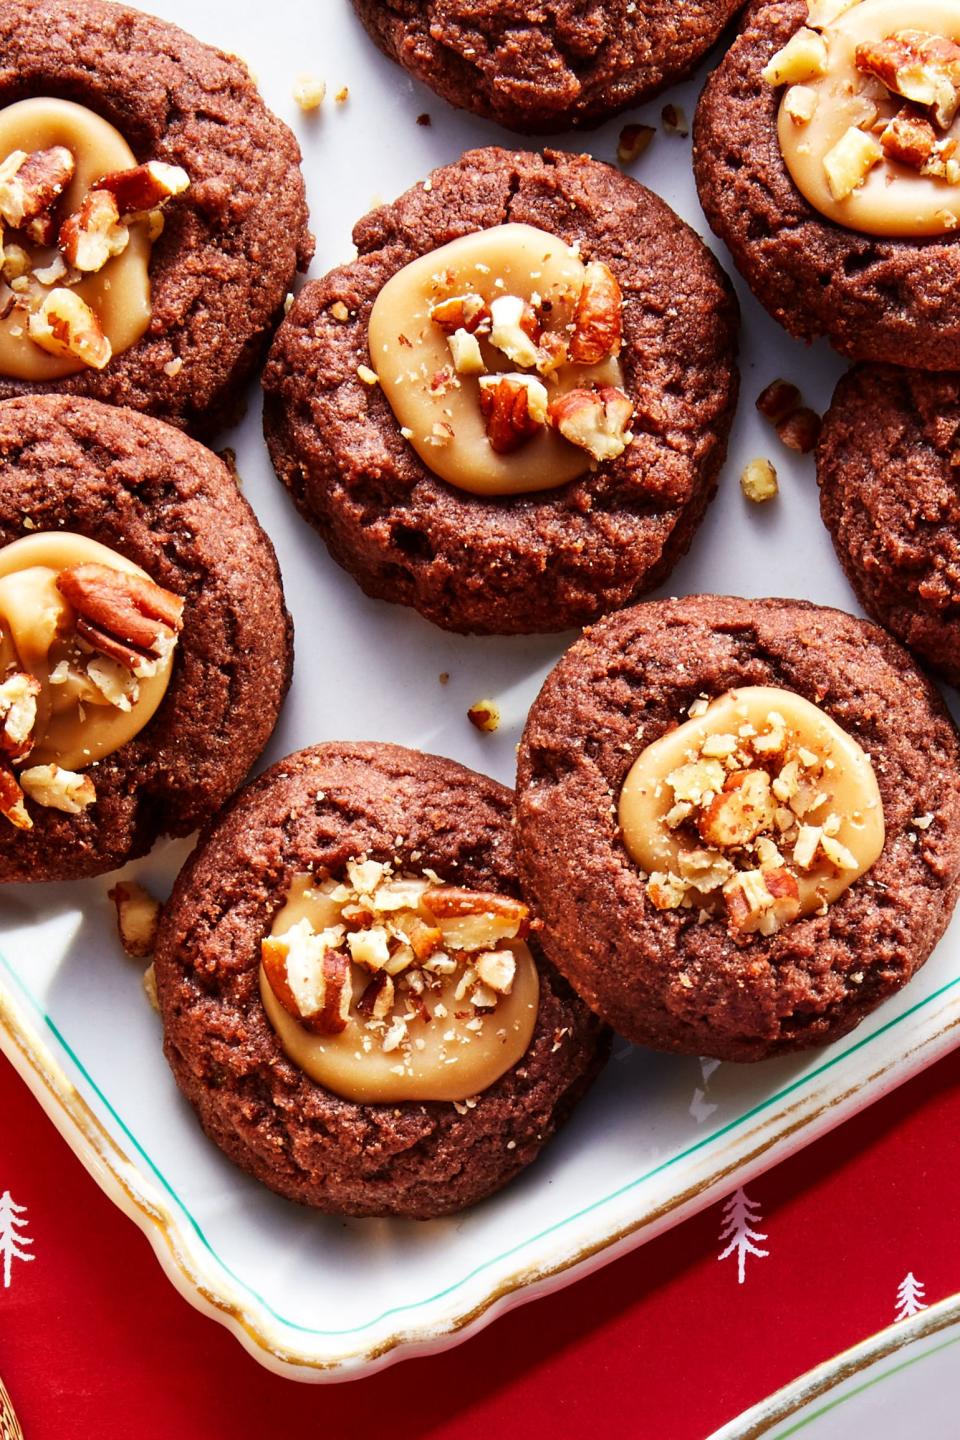 Chocolate Thumbprint Cookies with Praline Filling